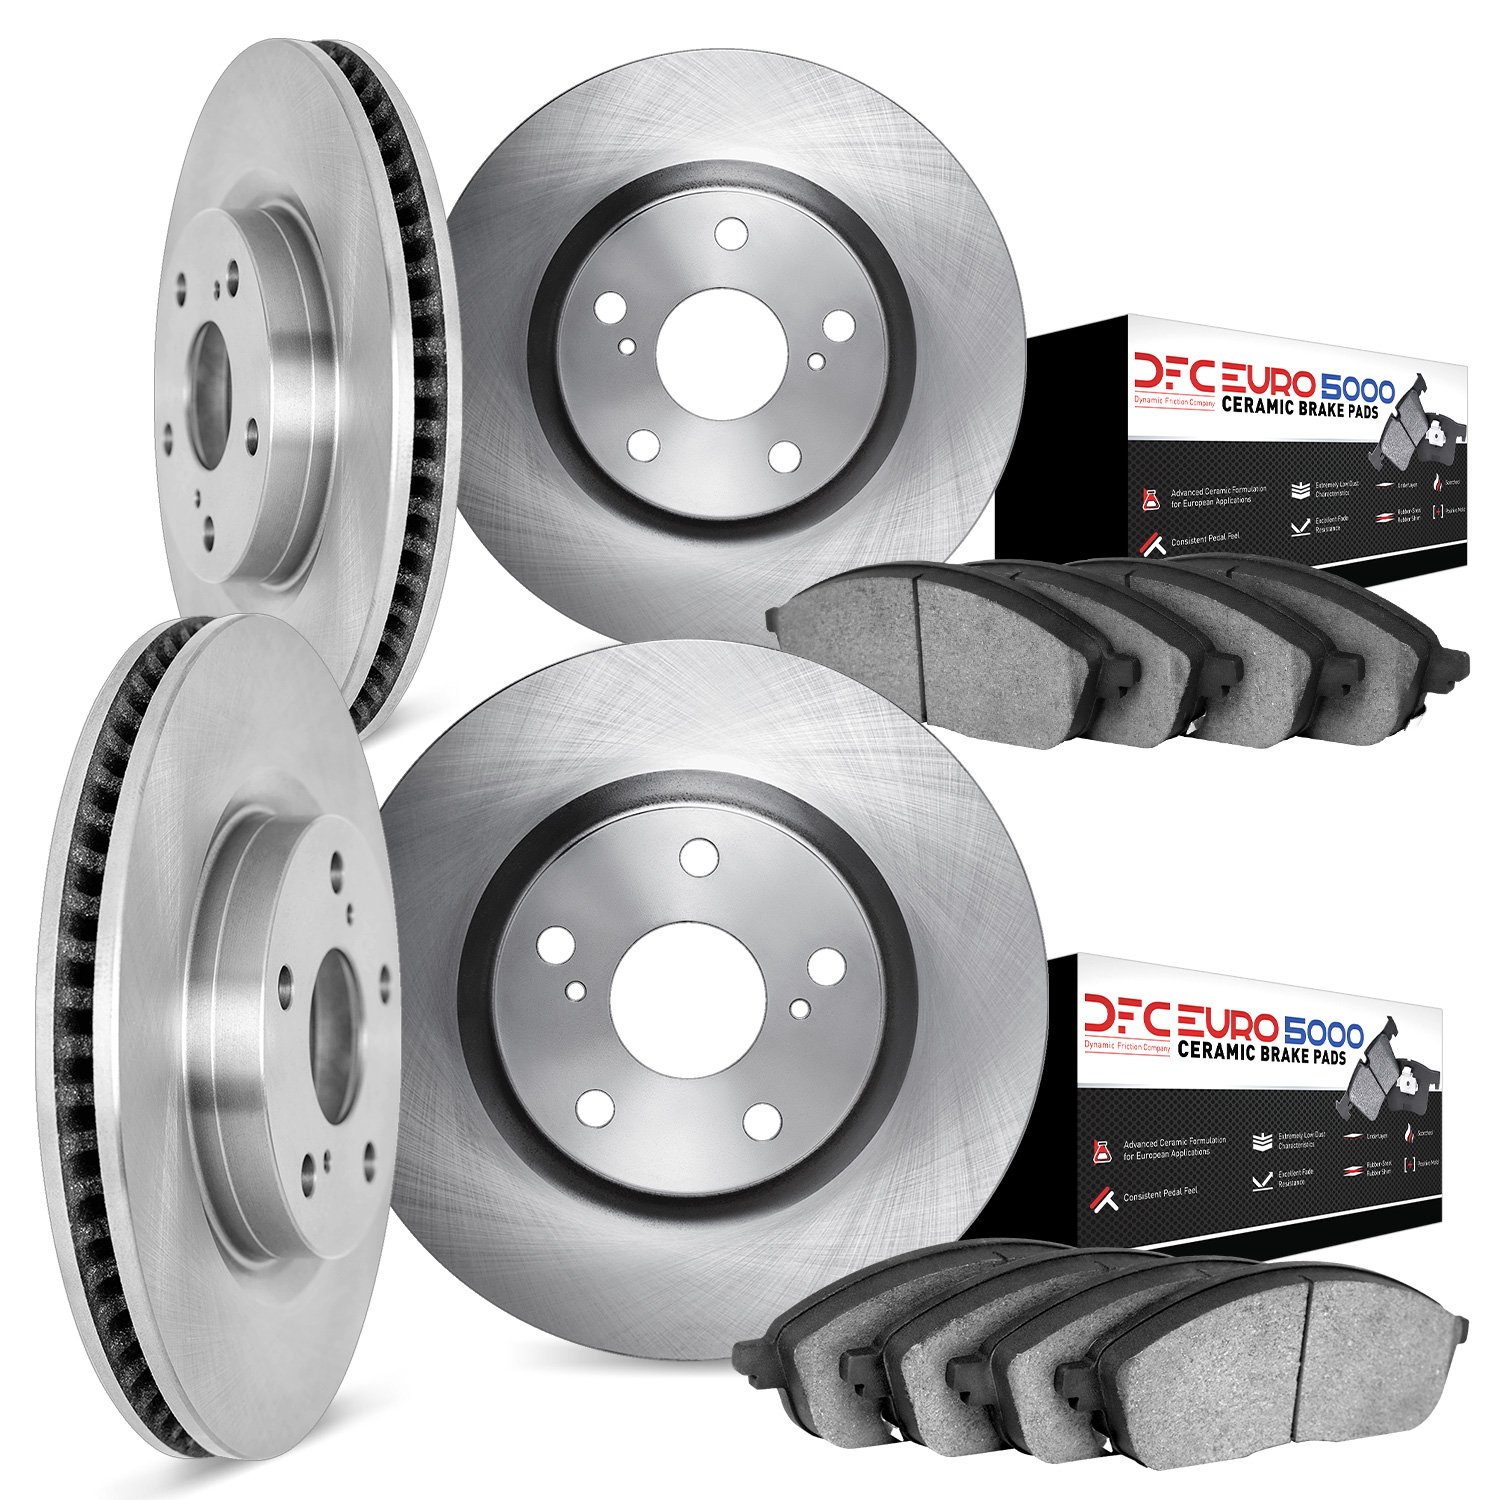 6604-63016 Brake Rotors w/5000 Euro Ceramic Brake Pads, 1993-2002 Mercedes-Benz, Position: Front and Rear